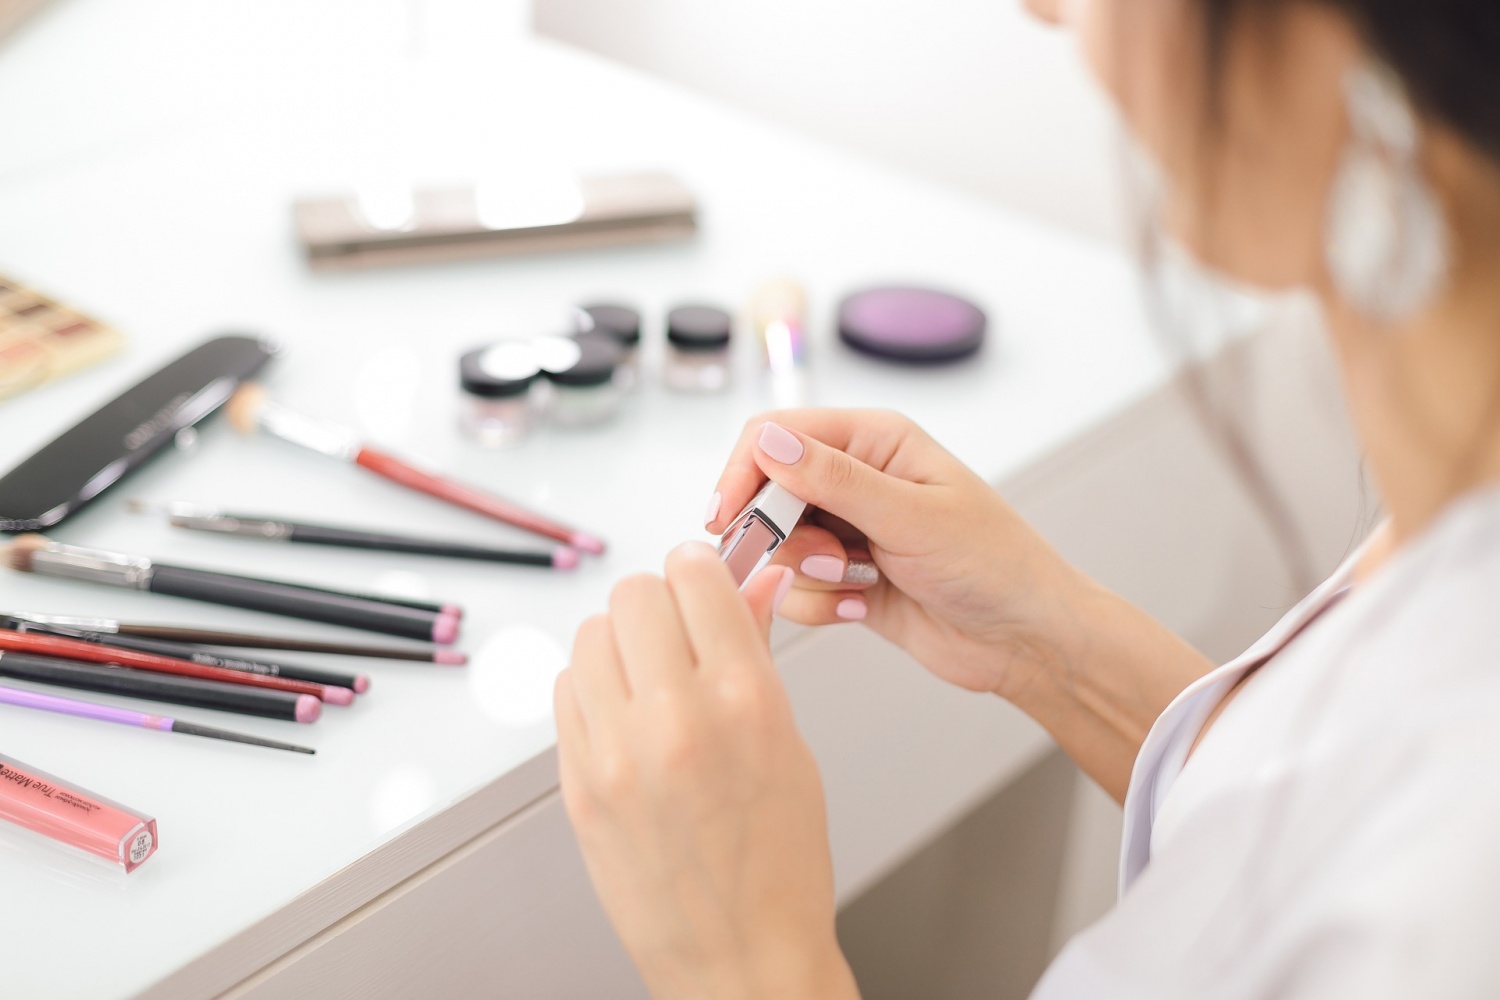 Pregnancy-Safe Makeup Ingredients You May Want to Reevaluate in Your Regular Makeup Routine